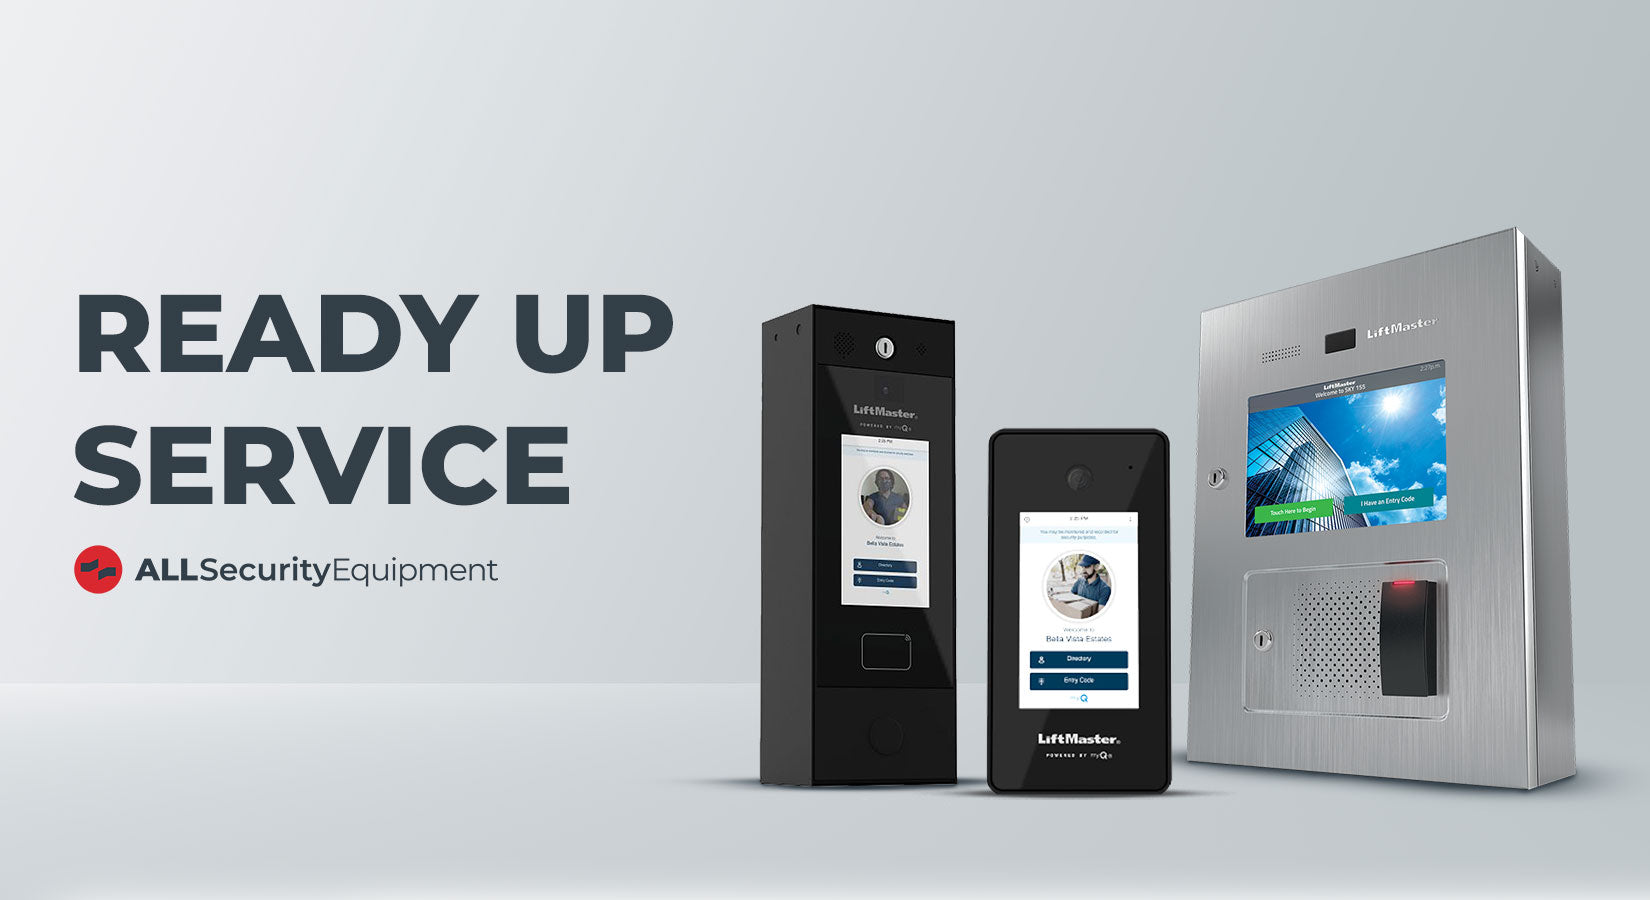 Ready Up Service for LiftMaster CAPXLV, CAPXM, and CAPXS Smart Intercoms | All Security Equipment